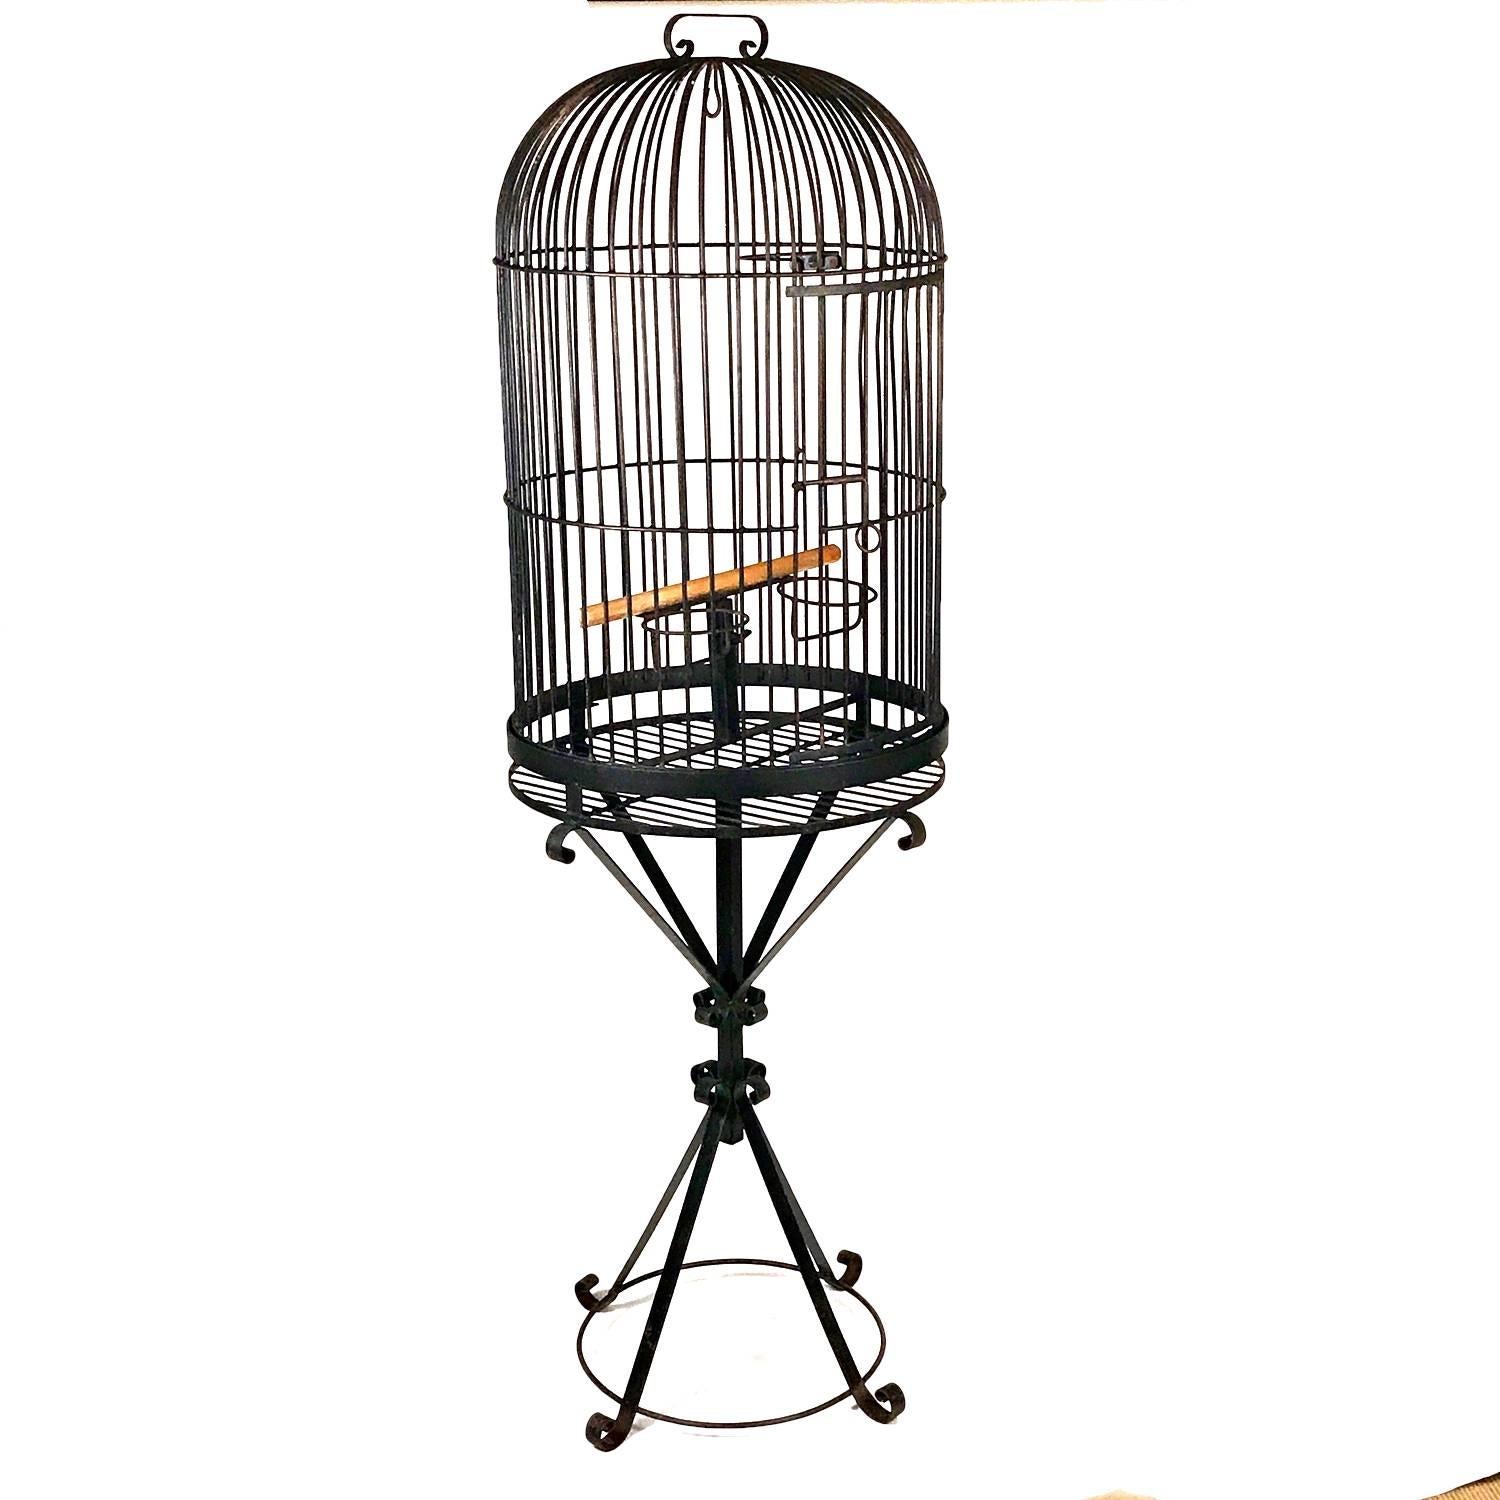 Early American wrought iron birdcage.